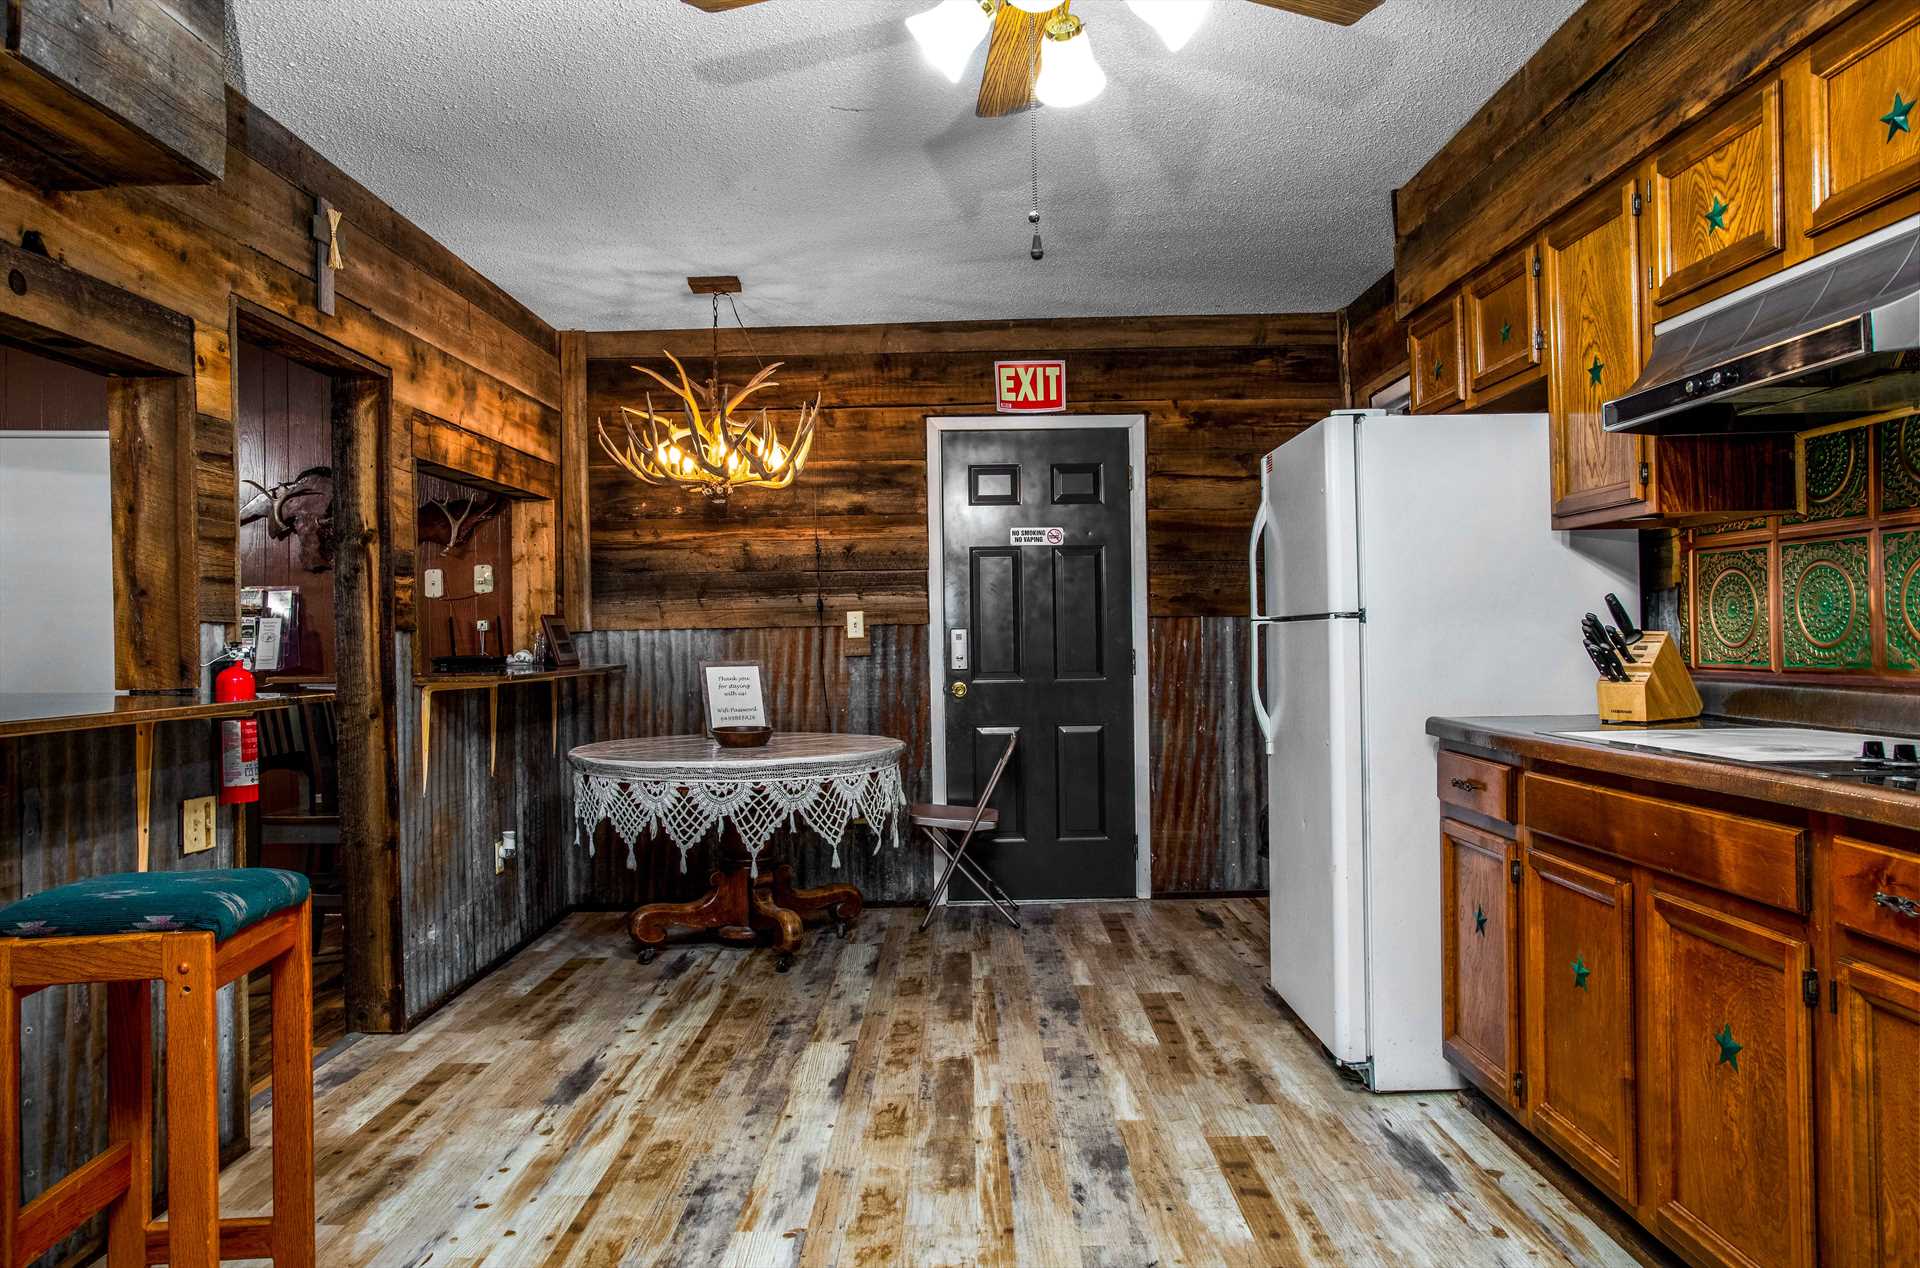                                                 Even though it has a rustic pioneer-era vibe, the Retreat's kitchen is equipped with modern appliances for meal prep!